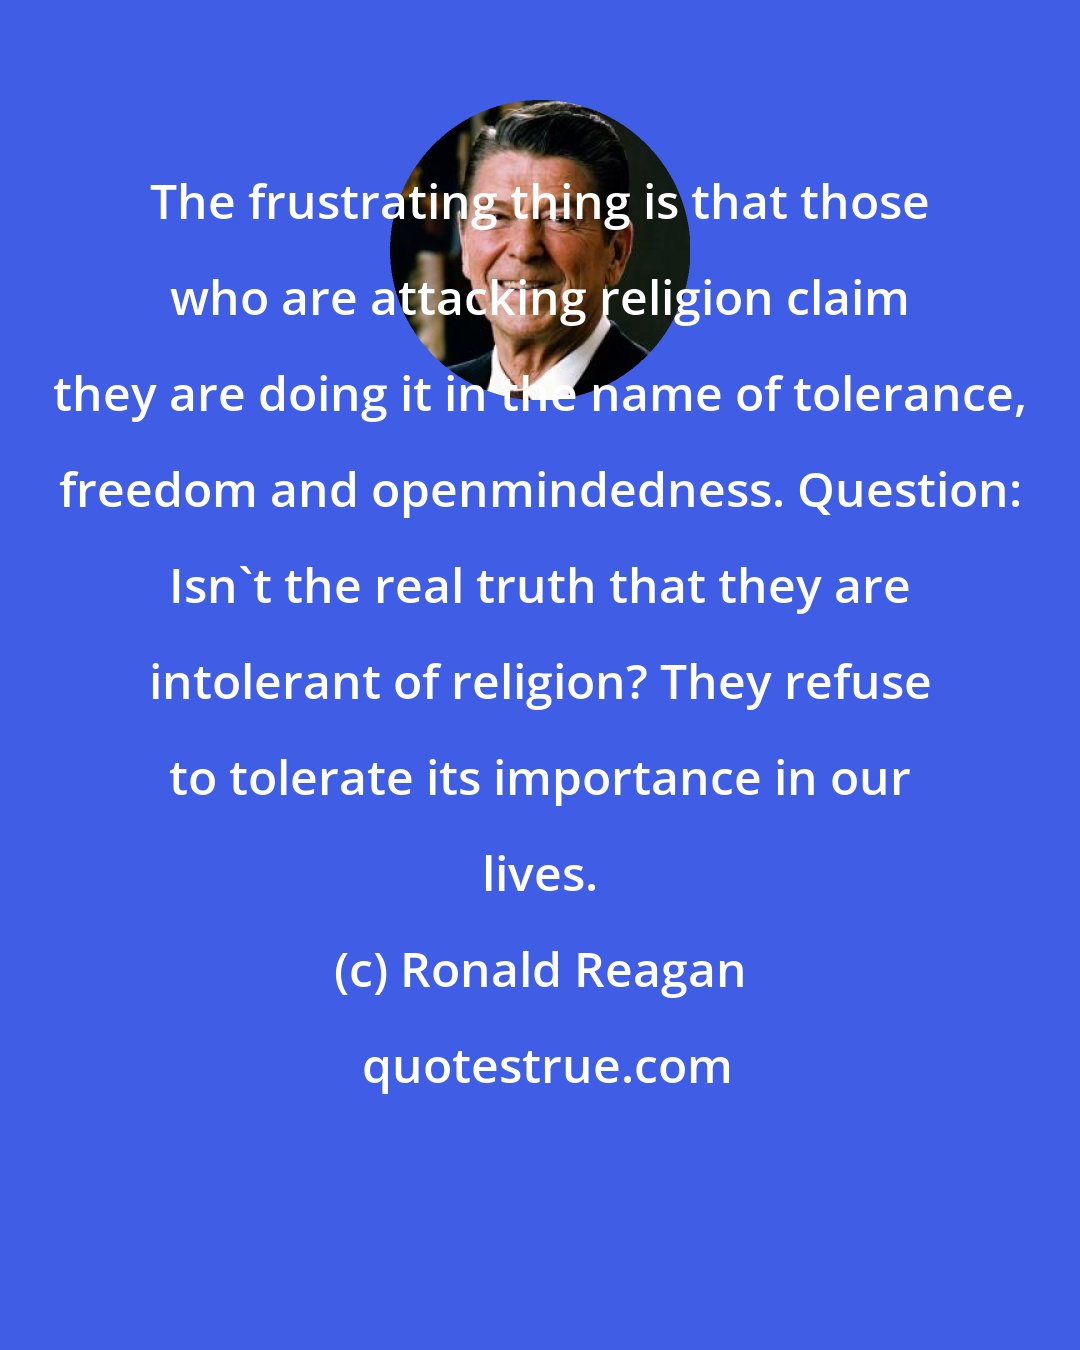 Ronald Reagan: The frustrating thing is that those who are attacking religion claim they are doing it in the name of tolerance, freedom and openmindedness. Question: Isn't the real truth that they are intolerant of religion? They refuse to tolerate its importance in our lives.